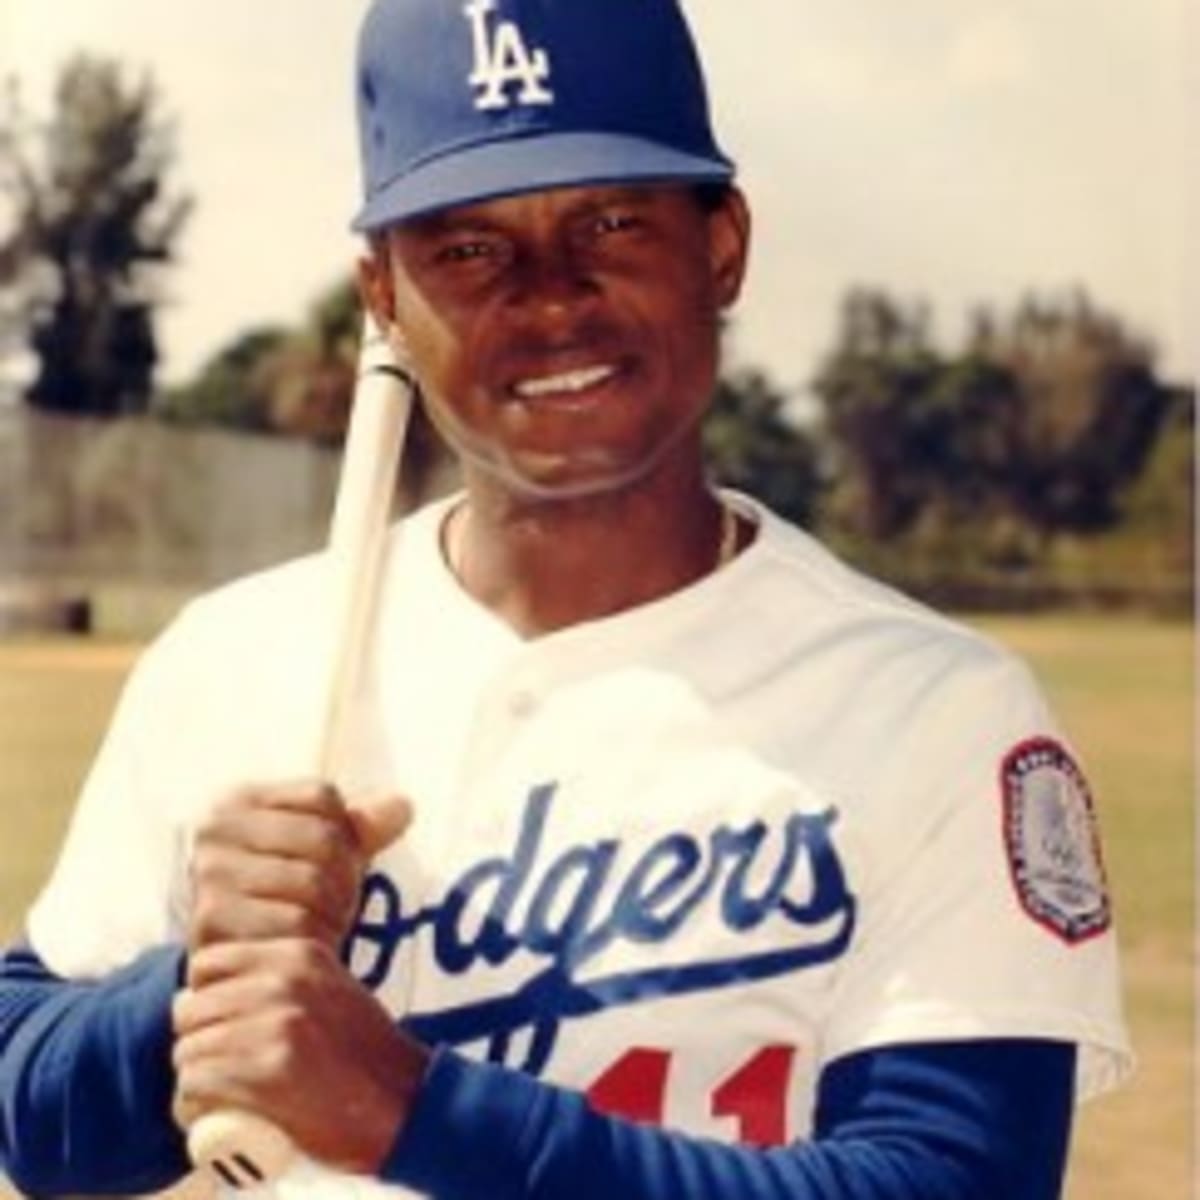 Manny Mota: Incredible in the pinch